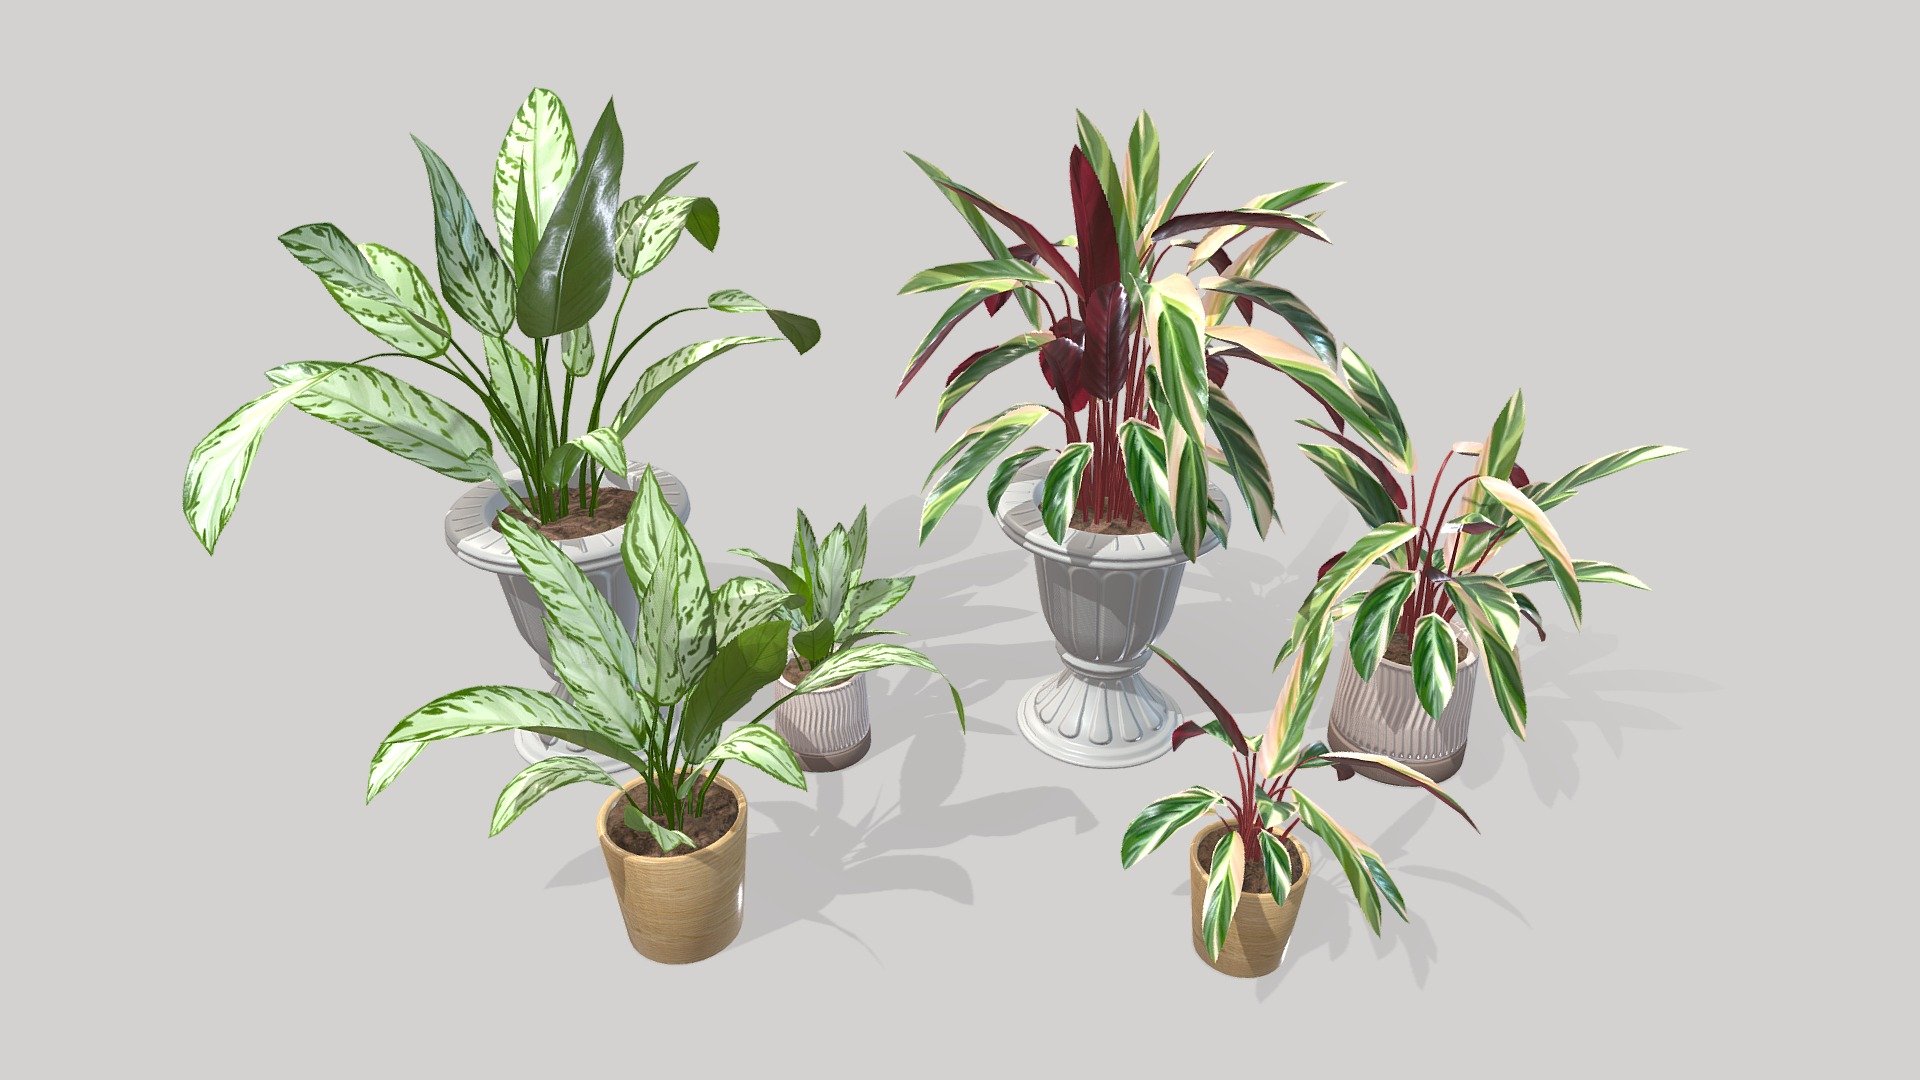 Handpainted indoor plants made for House Flipper 2 https://store.steampowered.com/app/1190970/House_Flipper_2/

Done in Blender, Substance Painter and Substance Designer. 
Pots created by my friend, Aleksander Pantopulos - Indoor Plants - Game Assets - 3D model by Persefona 3d model